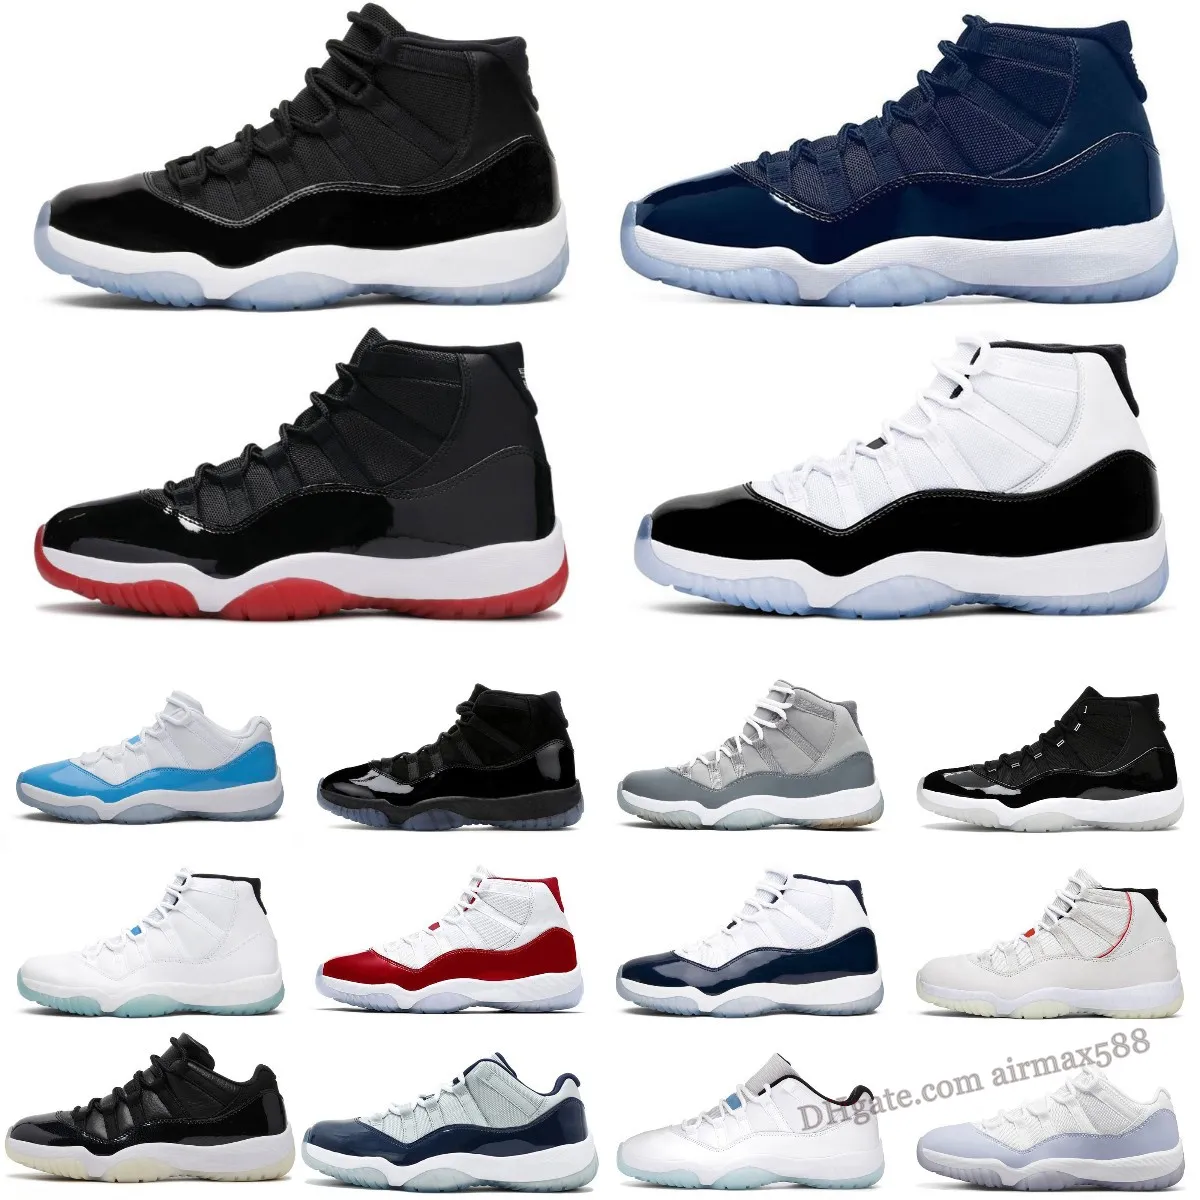 

Jumpman 11 11s Men Basketball Shoes Cherry Cool Grey Midnight Navy Concord Playoffs Bred Low Legend Blue Space Jam Gamma Blue Win Like 96 Mens Women Trainers Sneakers, A1130